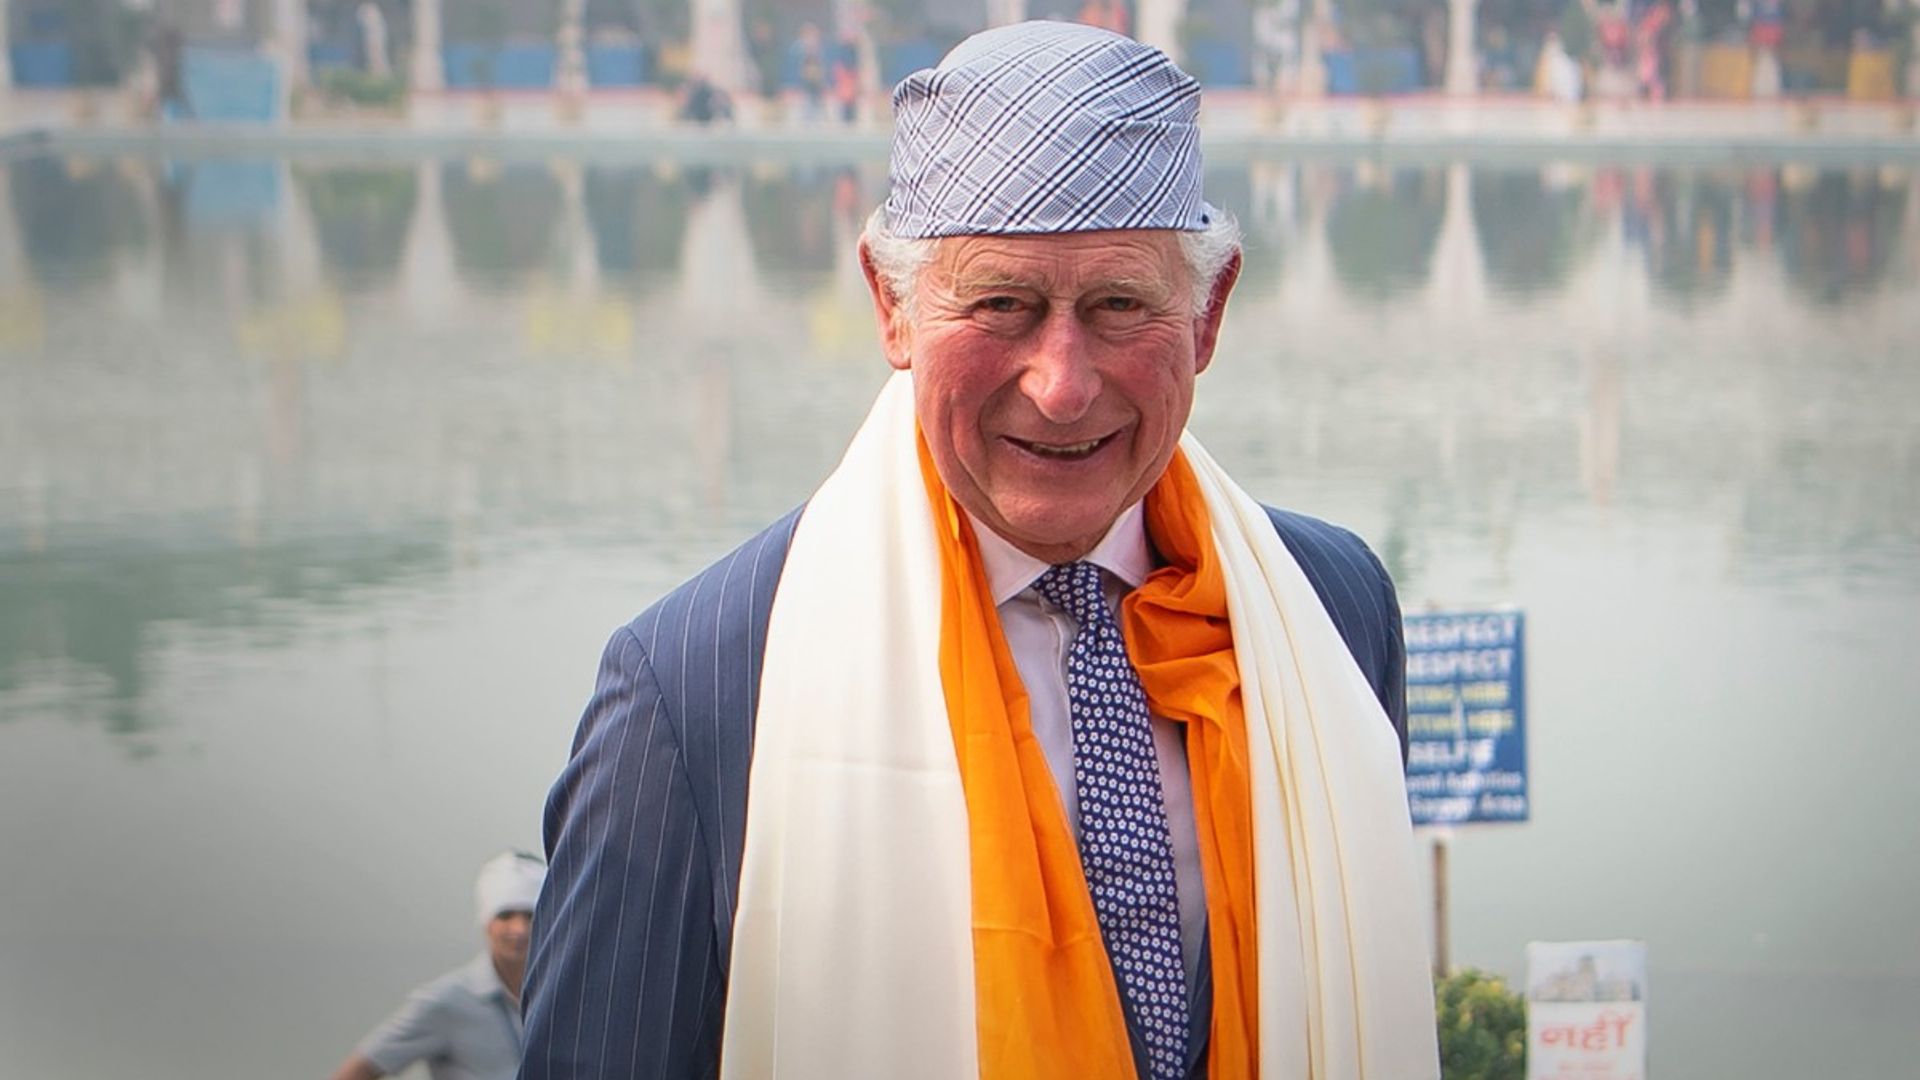 Prince Charles shares photo with Katy Perry in honour of Indian charity event